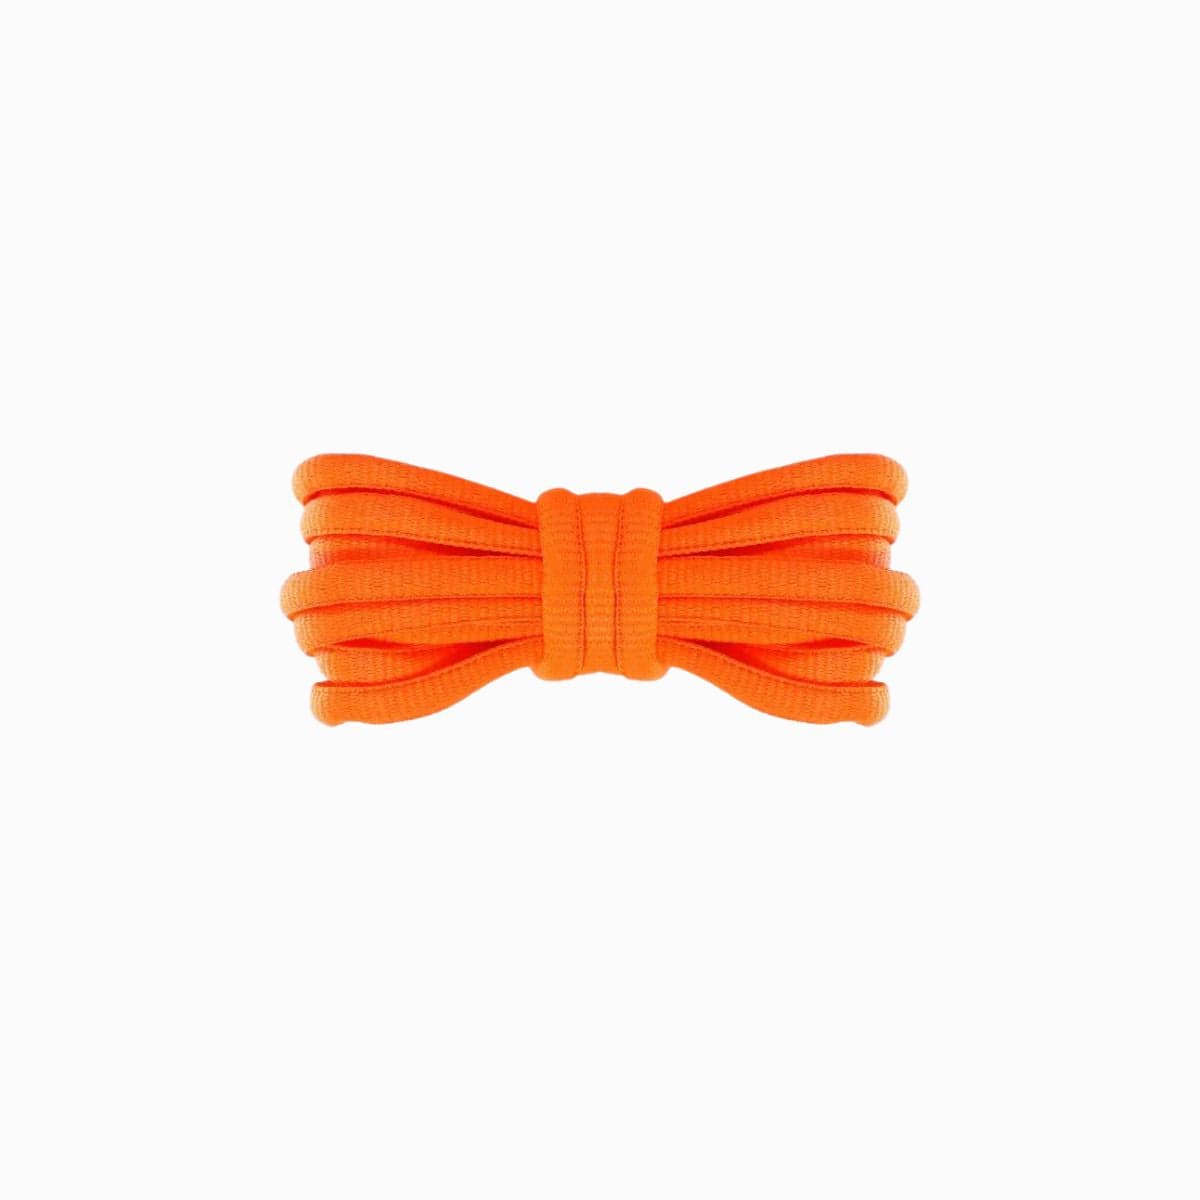 Orange Replacement Adidas Shoe Laces for Adidas Spezial Sneakers by Kicks Shoelaces